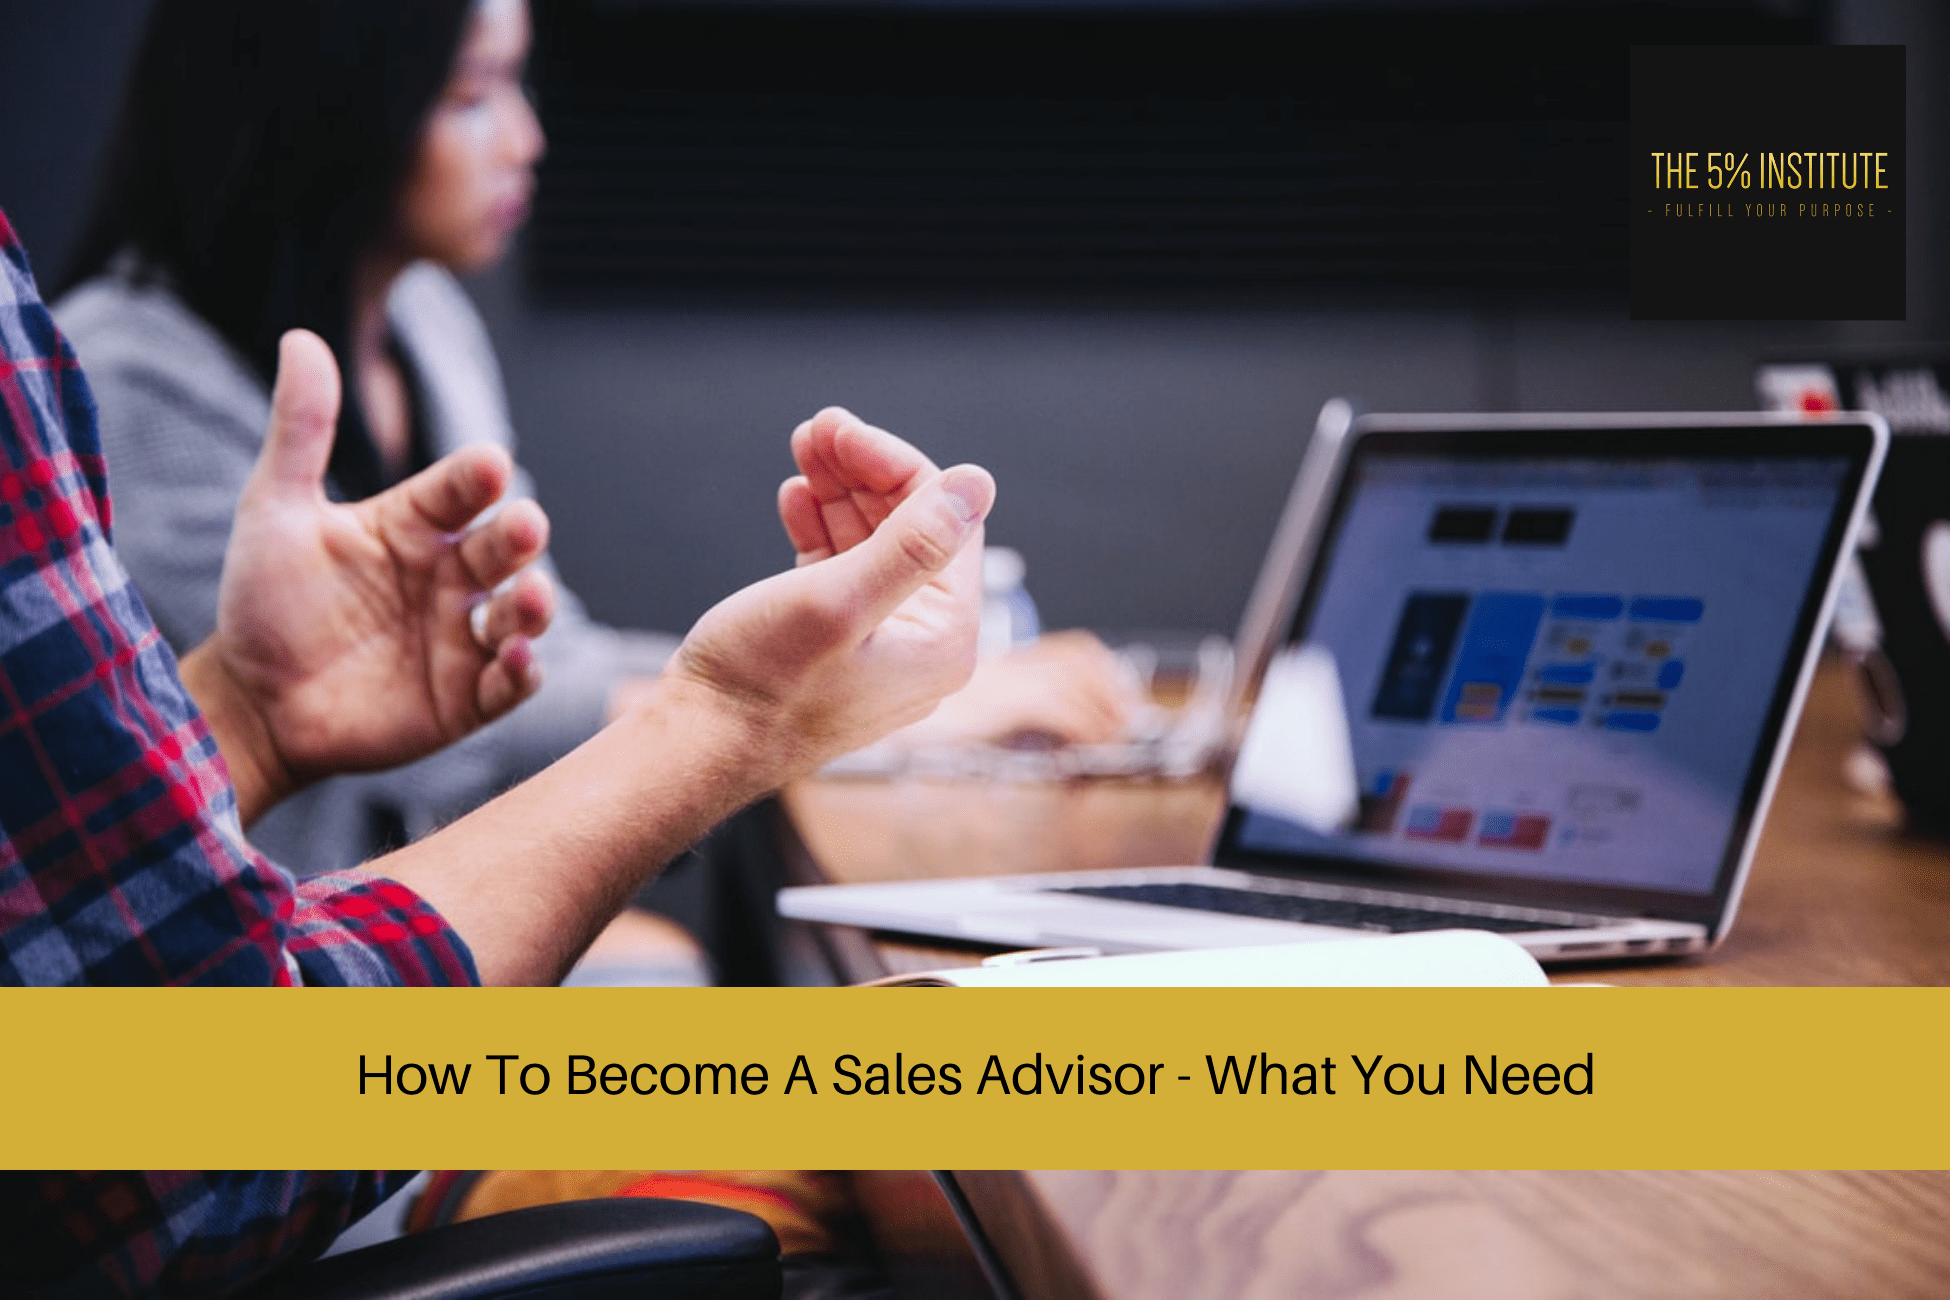 How To Become A Sales Advisor